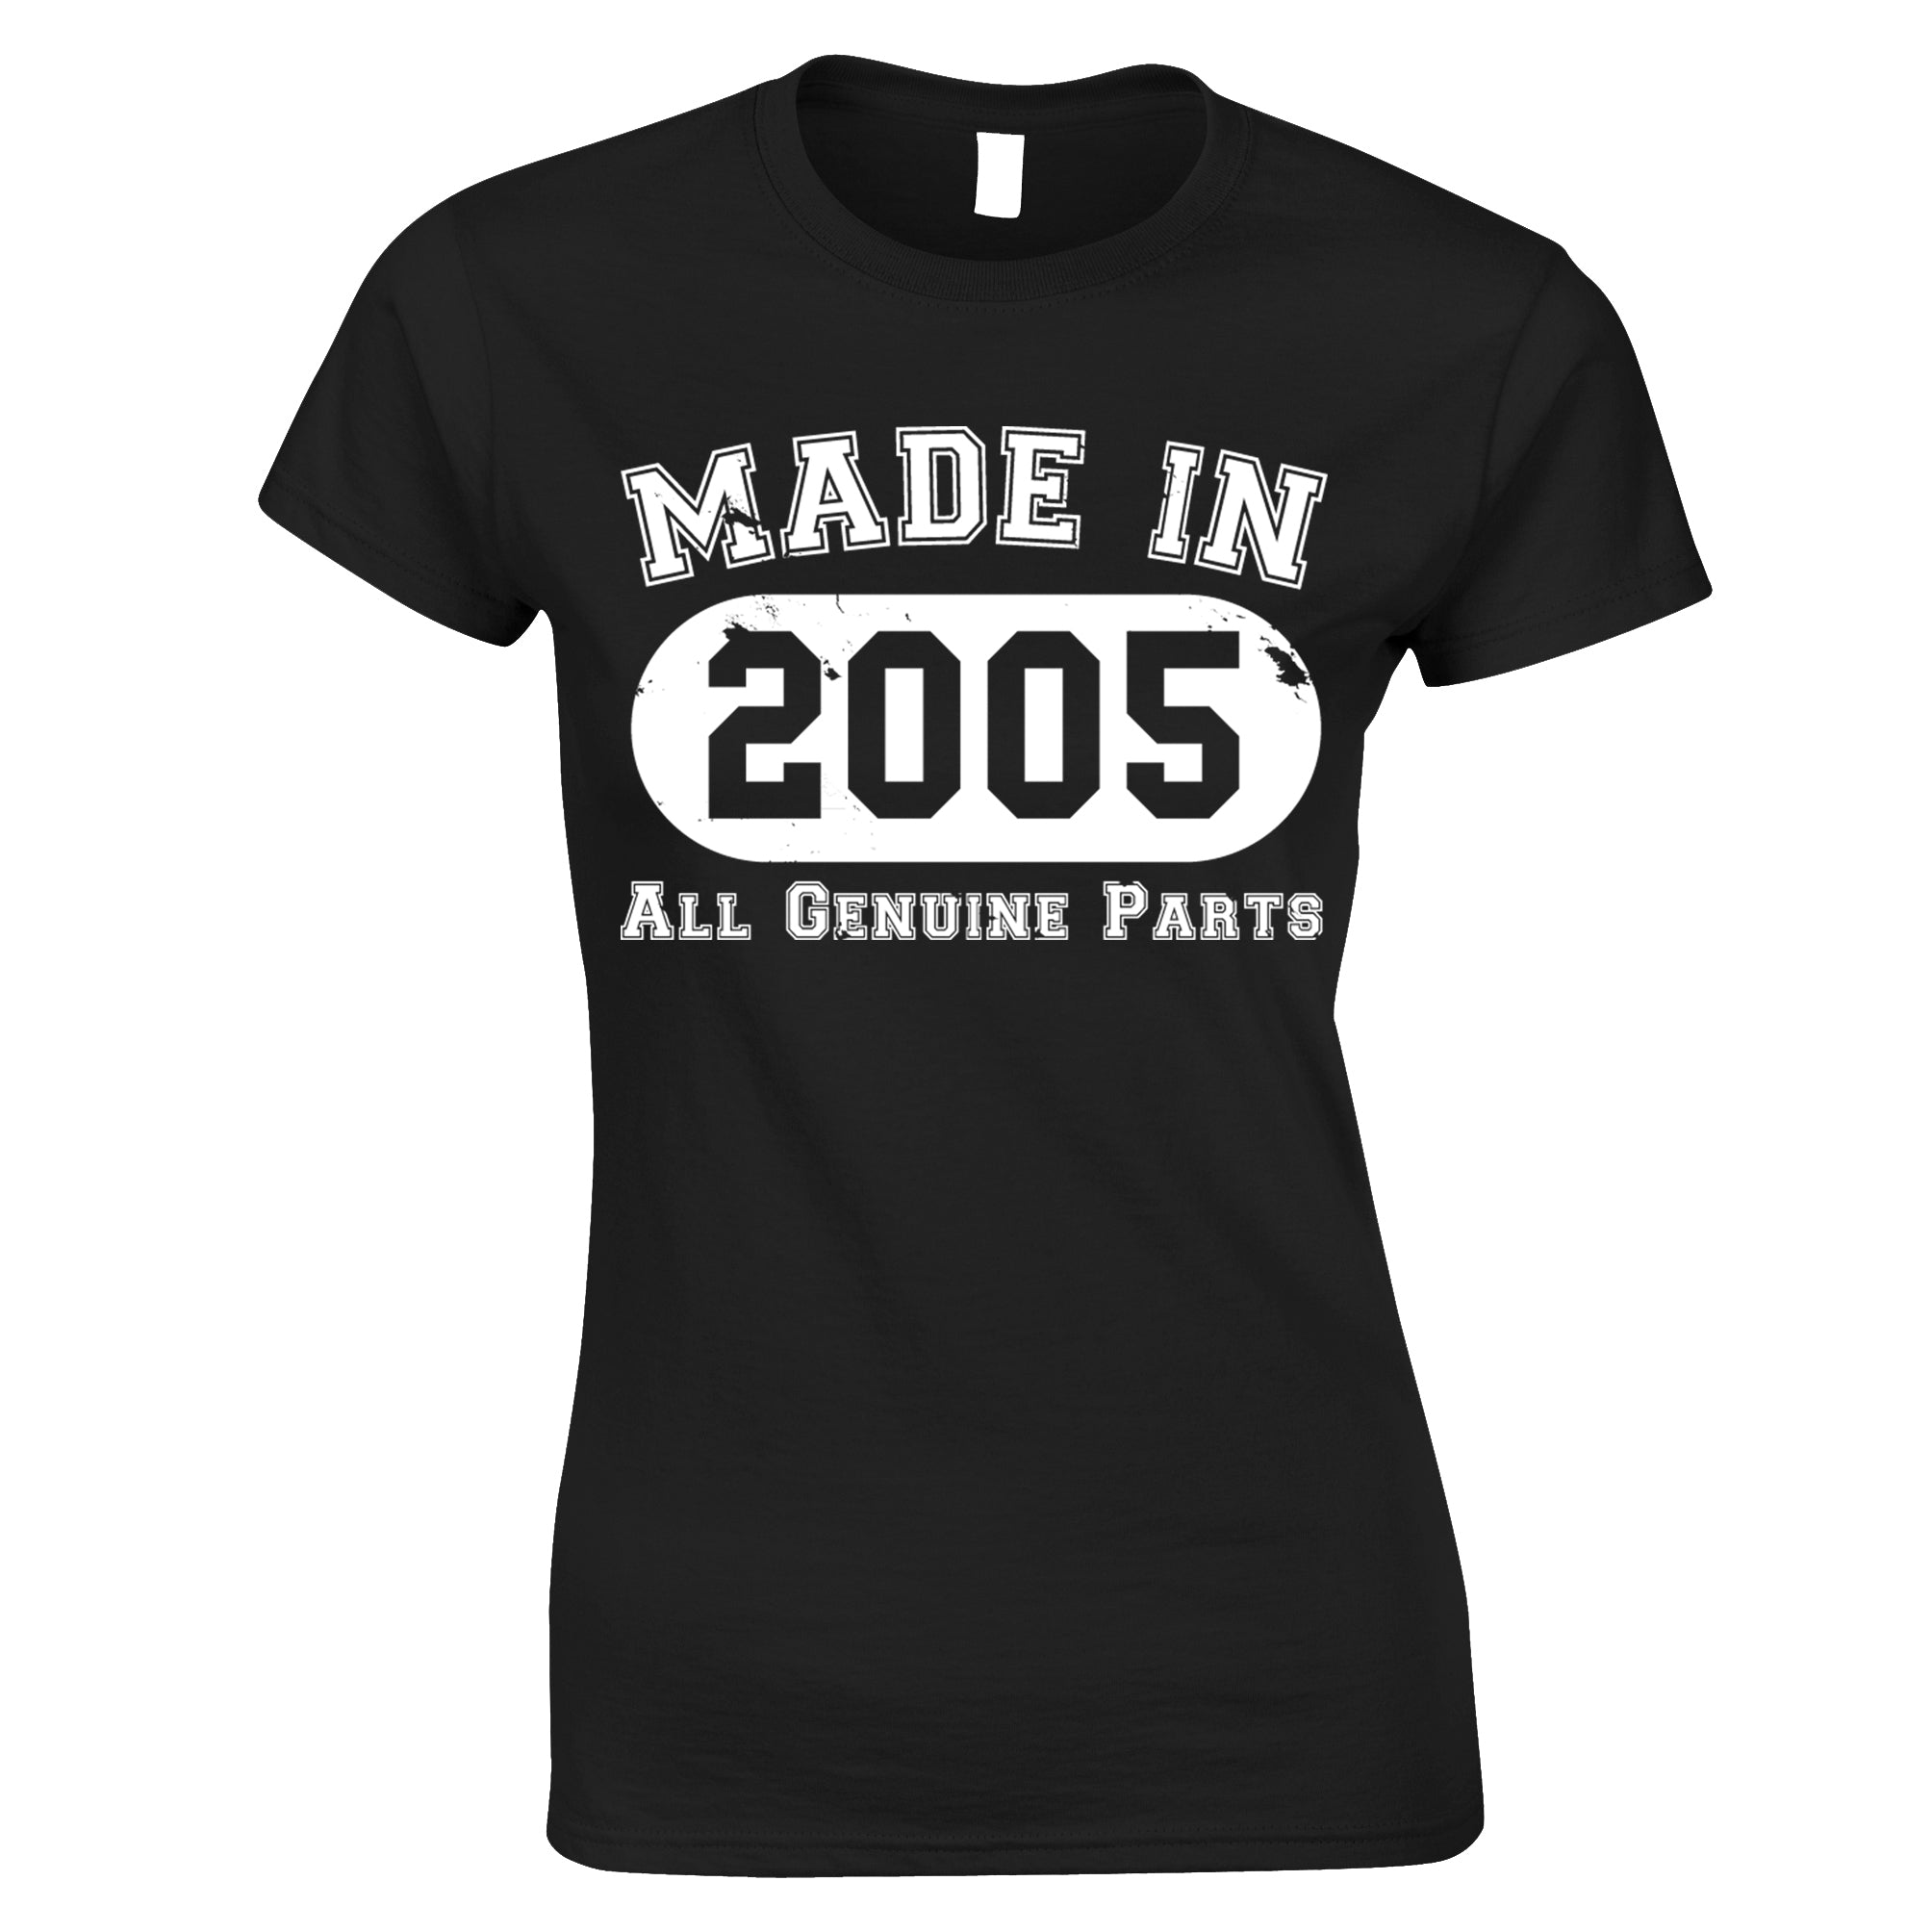 18th Birthday Womens T Shirt Made in 2005 - All Genuine Parts